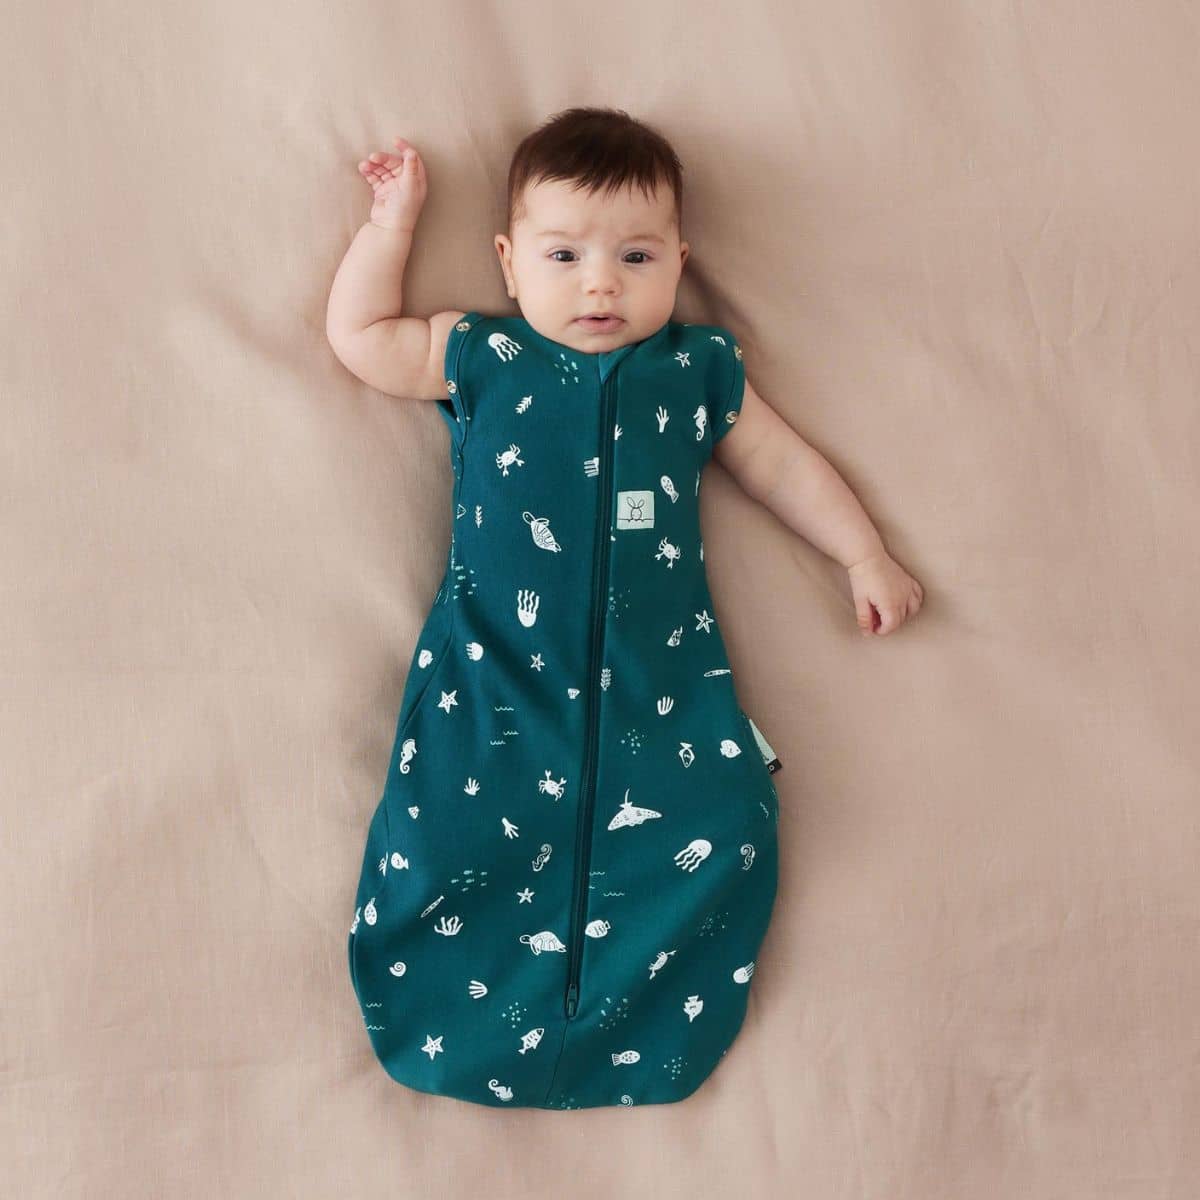 ergoPouch Cocoon Swaddle Bag 0.2 TOG - Ocean